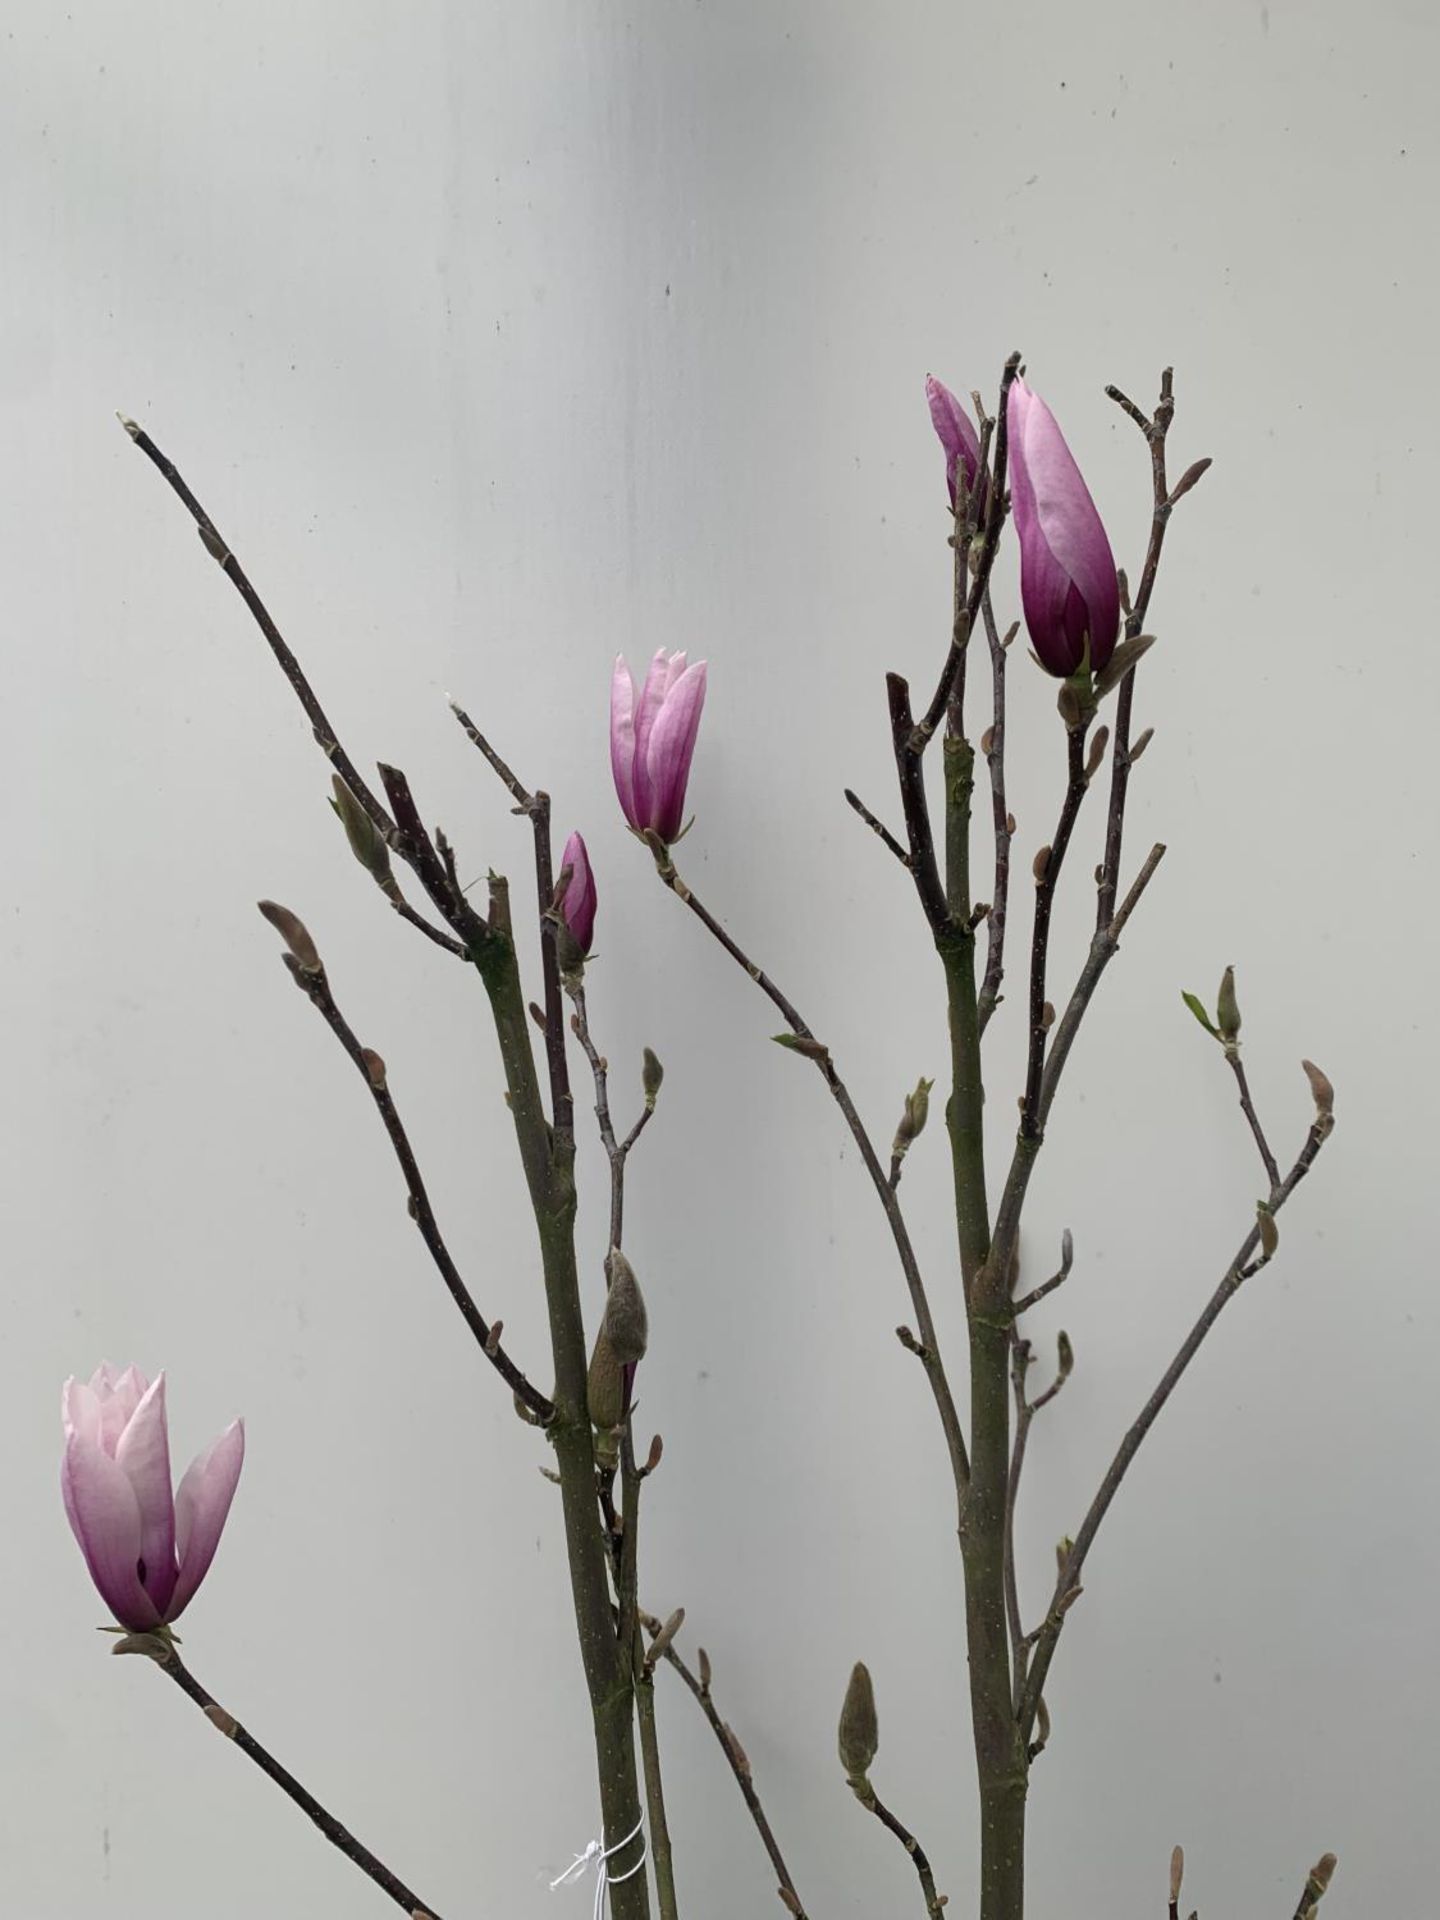 ONE MAGNOLIA PINK 'BETTY' APPROX 120CM IN HEIGHT IN 7 LTR POT PLUS VAT - Image 4 of 12